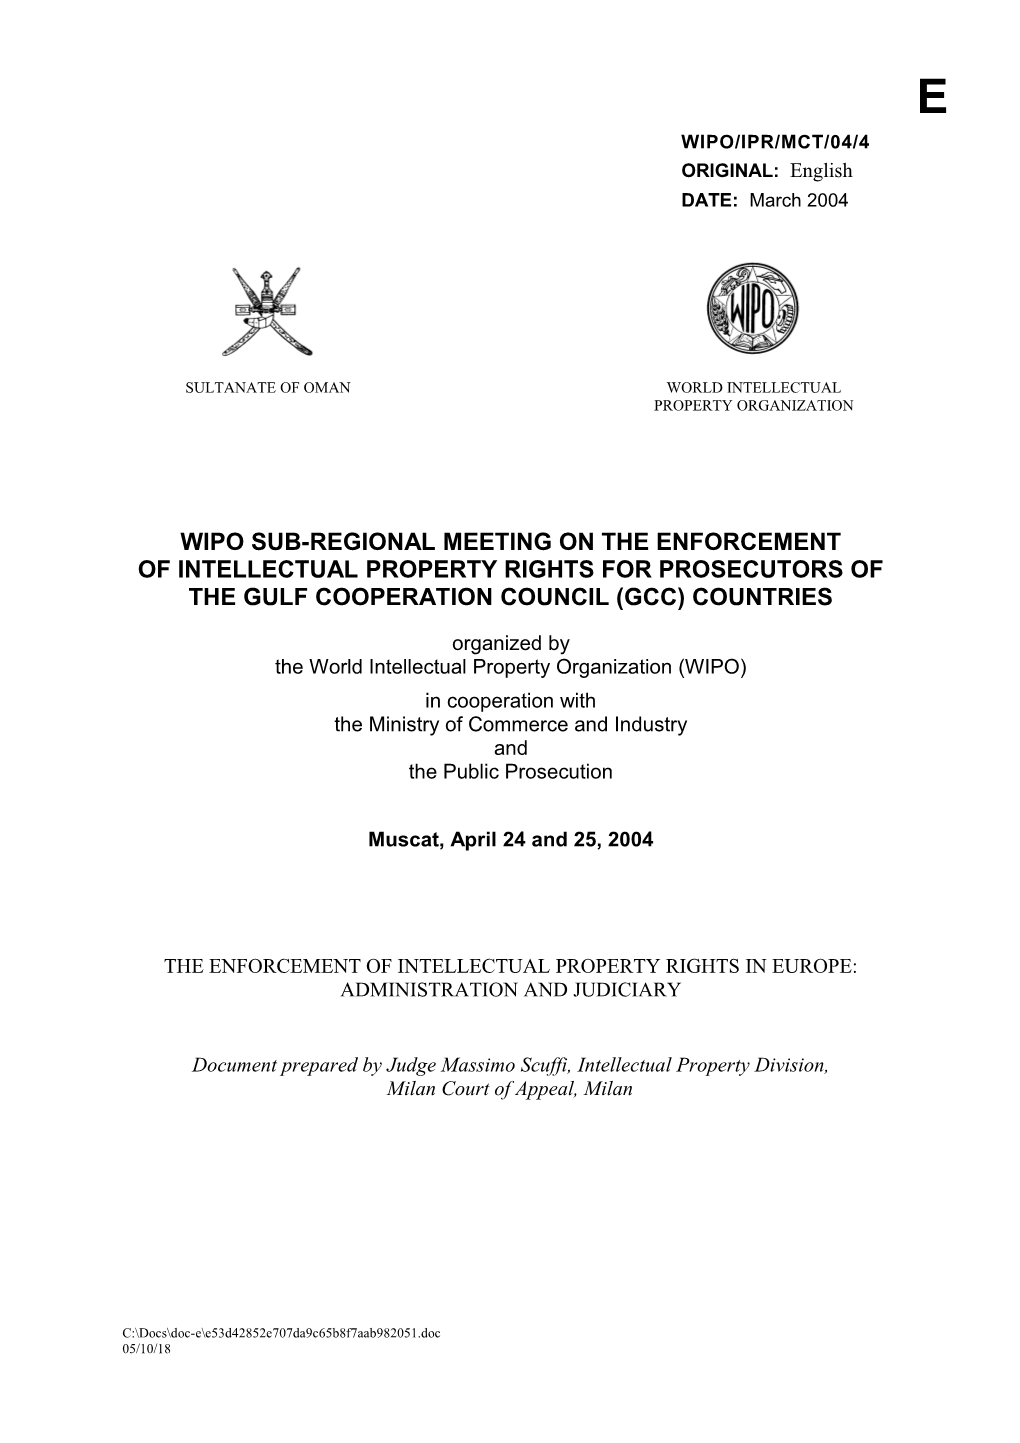 WIPO/IPR/MCT/04/4: the Enforcement of Intellectual Property Rights in Europe: Administration